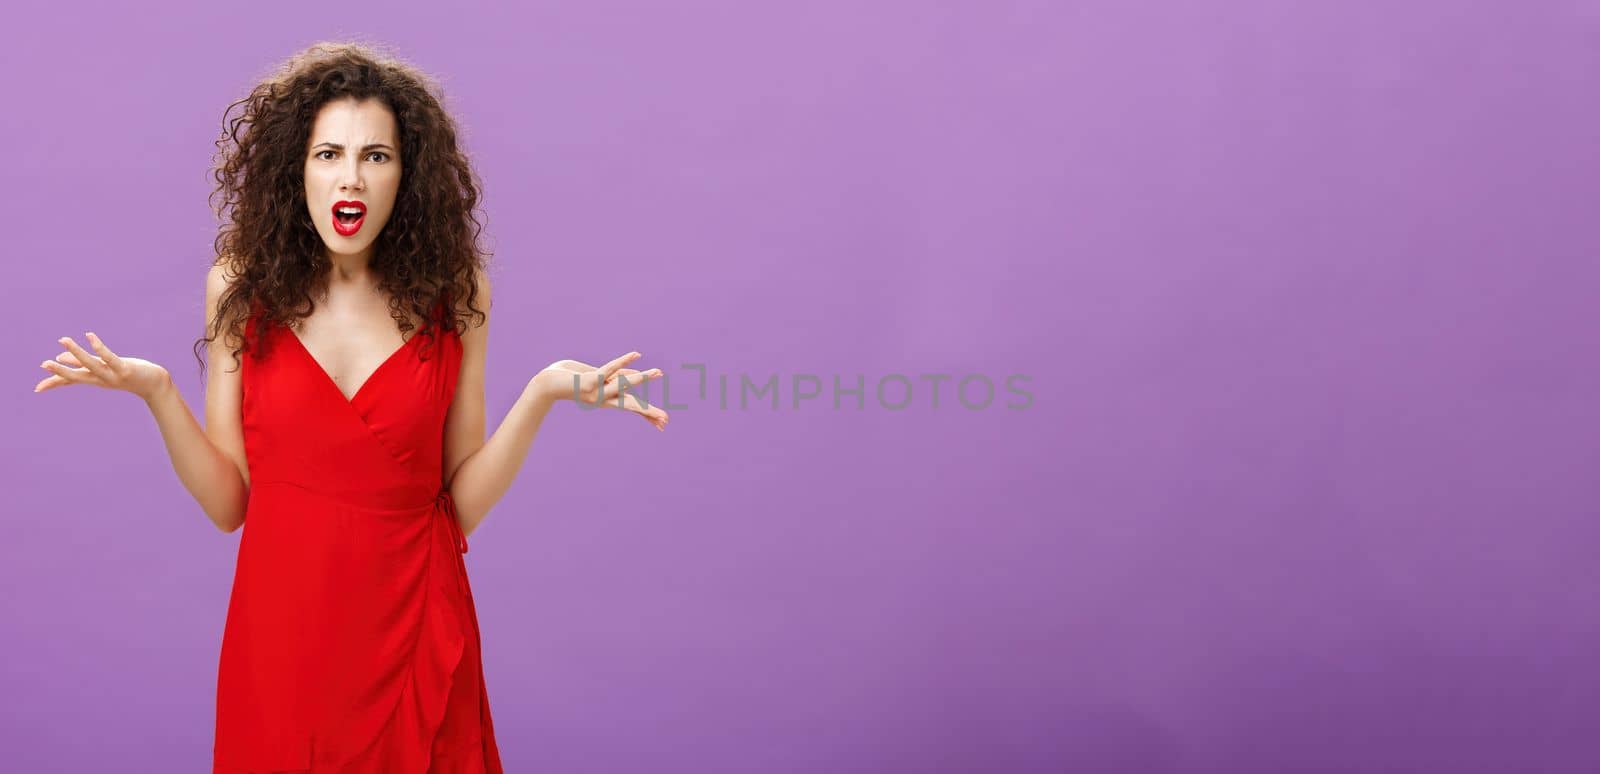 Woman being shocked guy breaking up with her during party. Concerned pissed and outraged good-looking lady in red dress with evening makeup shrugging with spread palms in clueless and questioned pose.